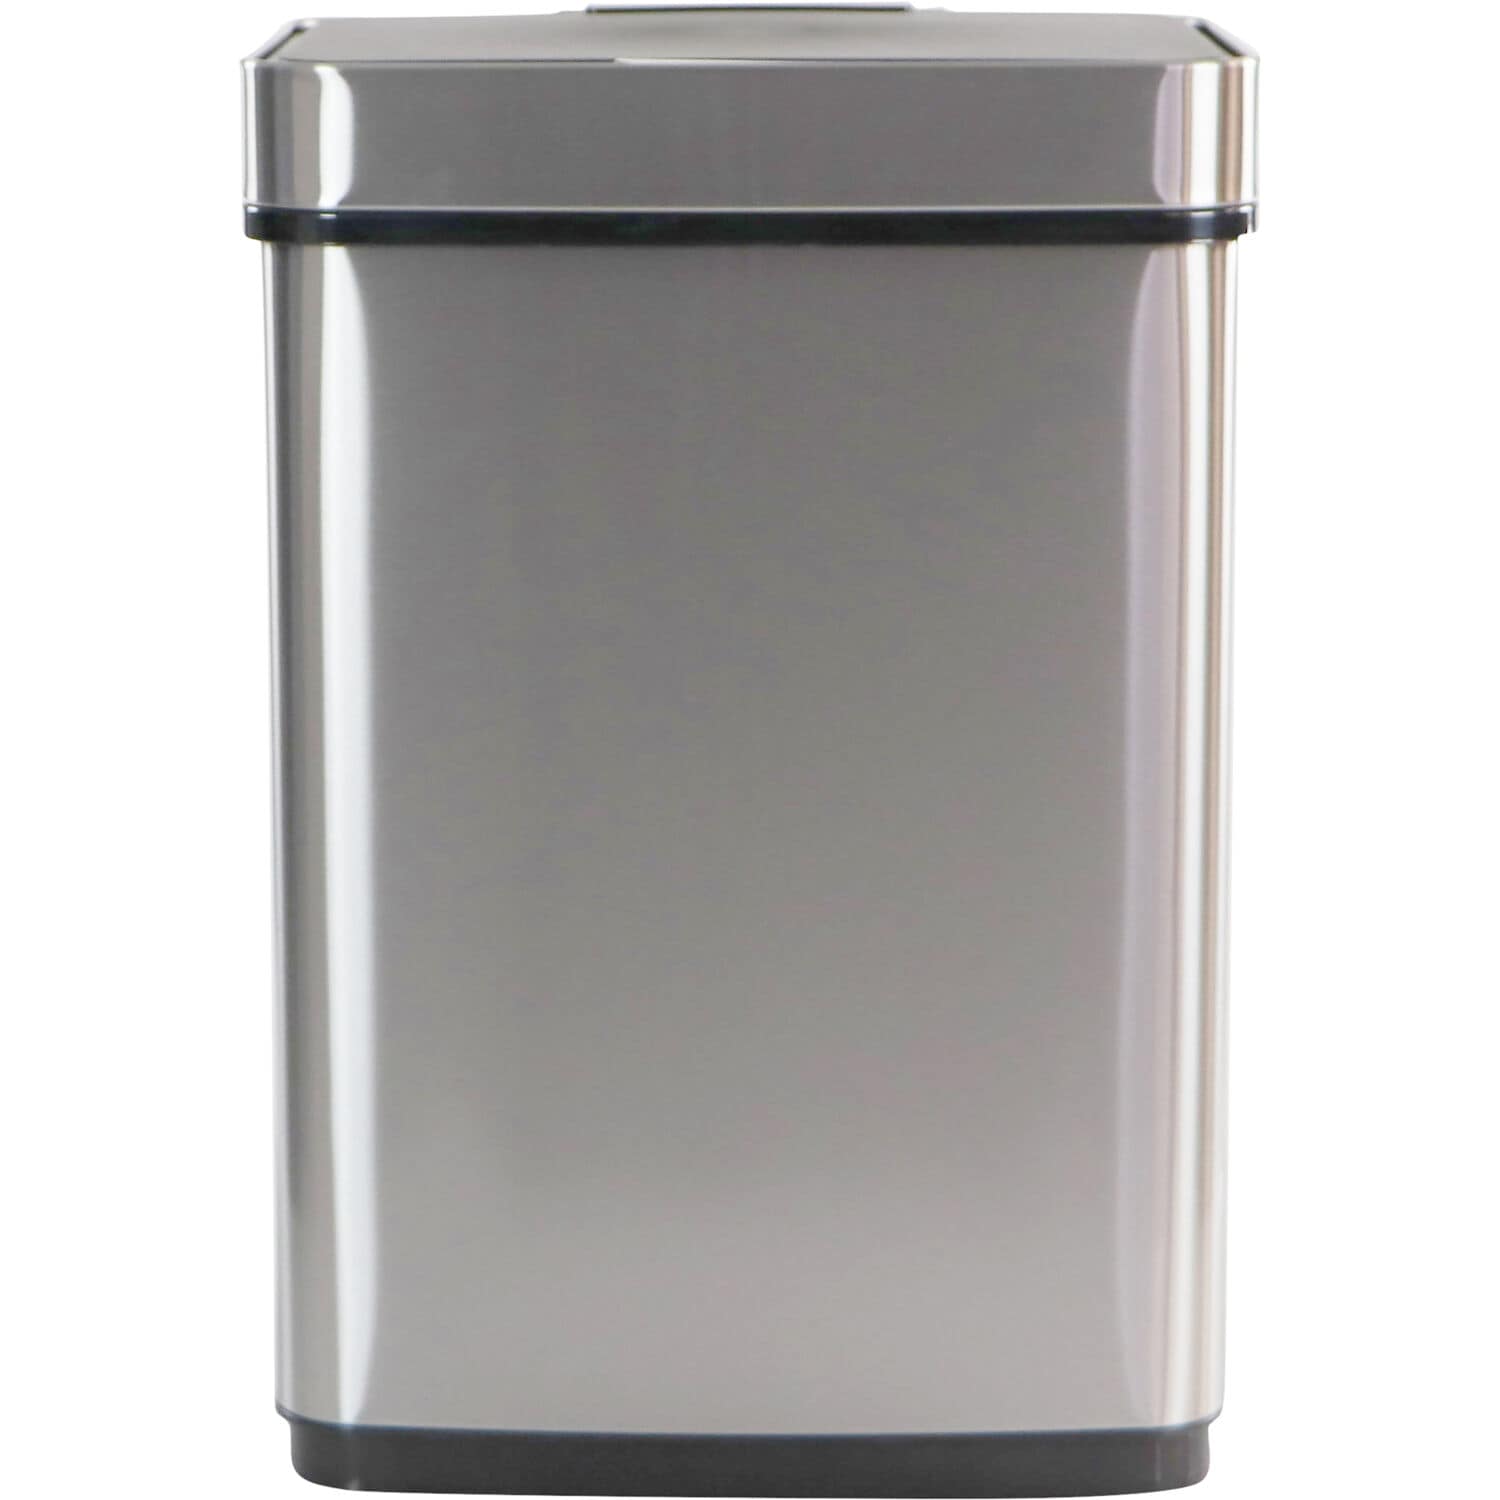 PayLessHere 13 Gallon 50 Liter Kitchen Trash Can High-Capacity with Lid  Brushed Stainless Steel - Matthews Auctioneers